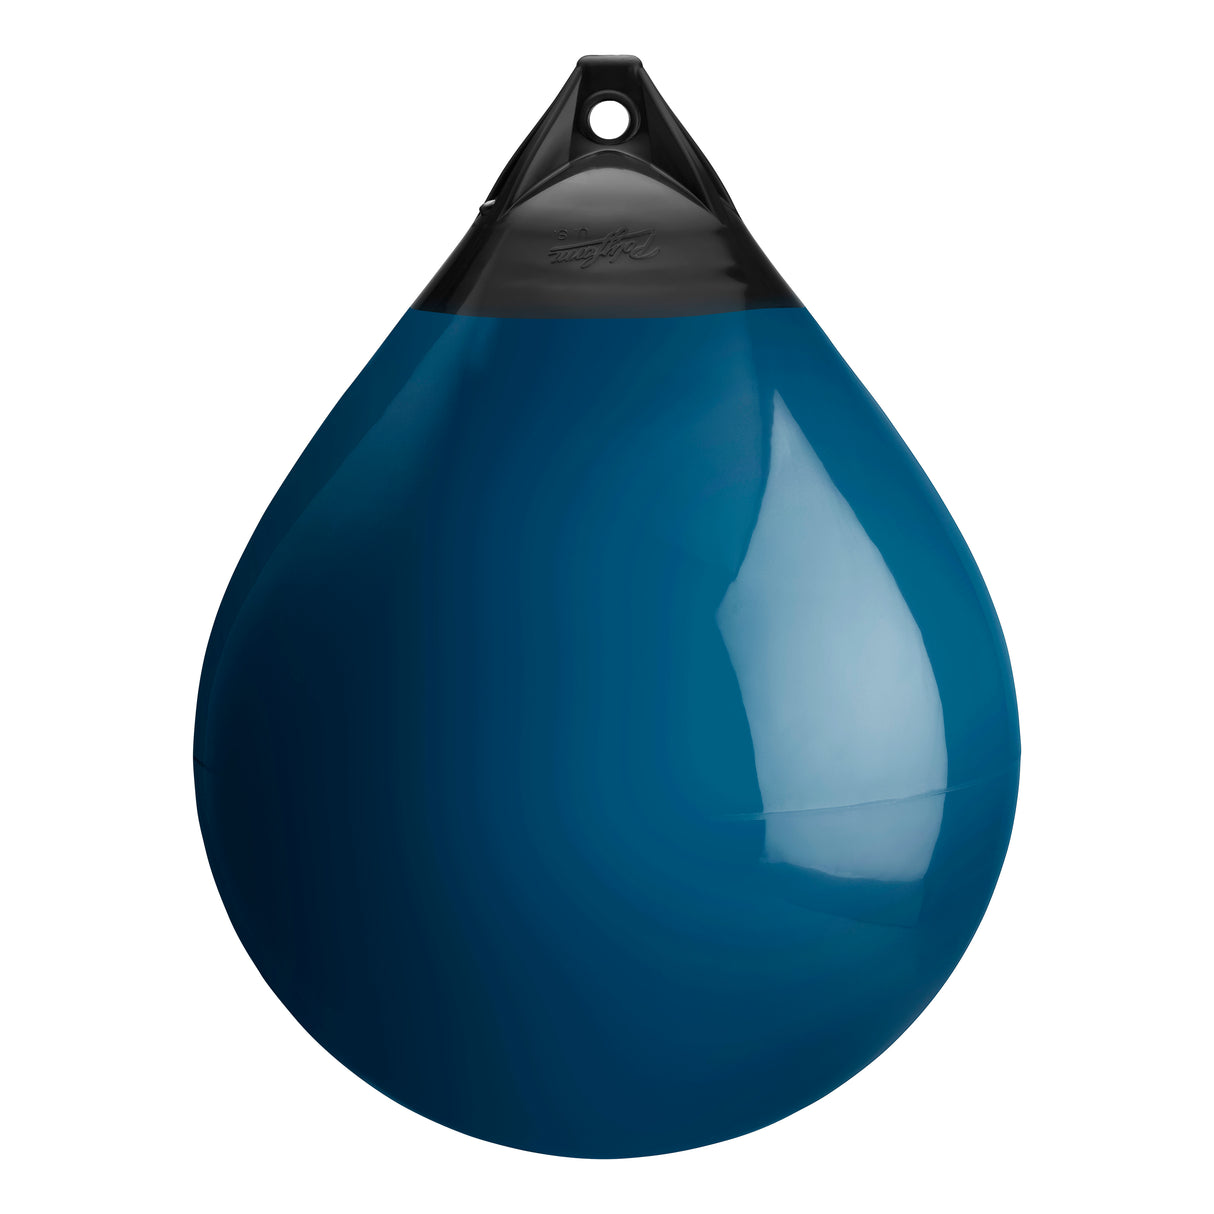 Catalina Blue buoy with Black-Top, Polyform A-6